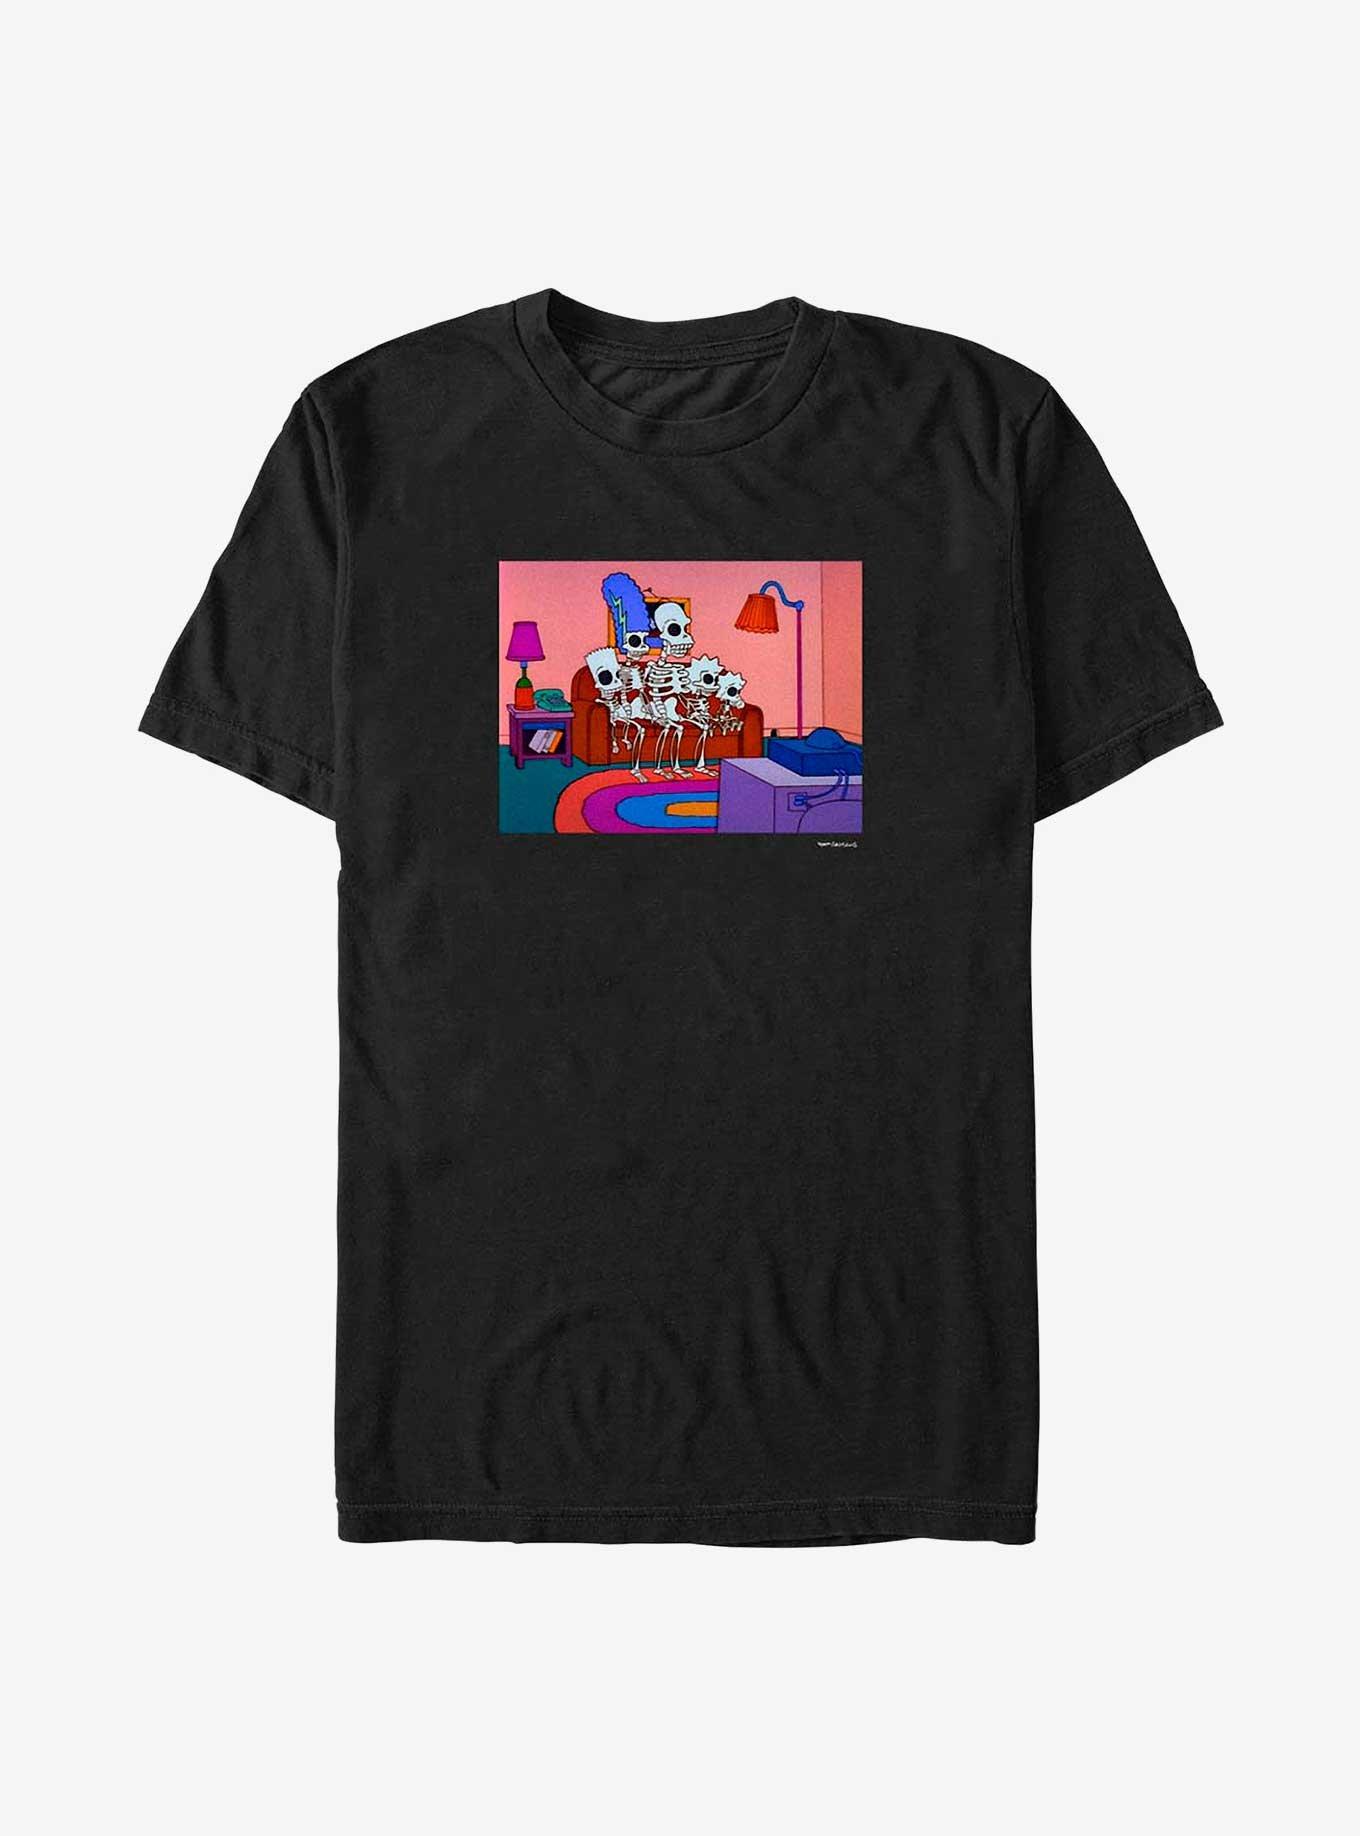 The Simpsons Treehouse Intro T-Shirt, BLACK, hi-res